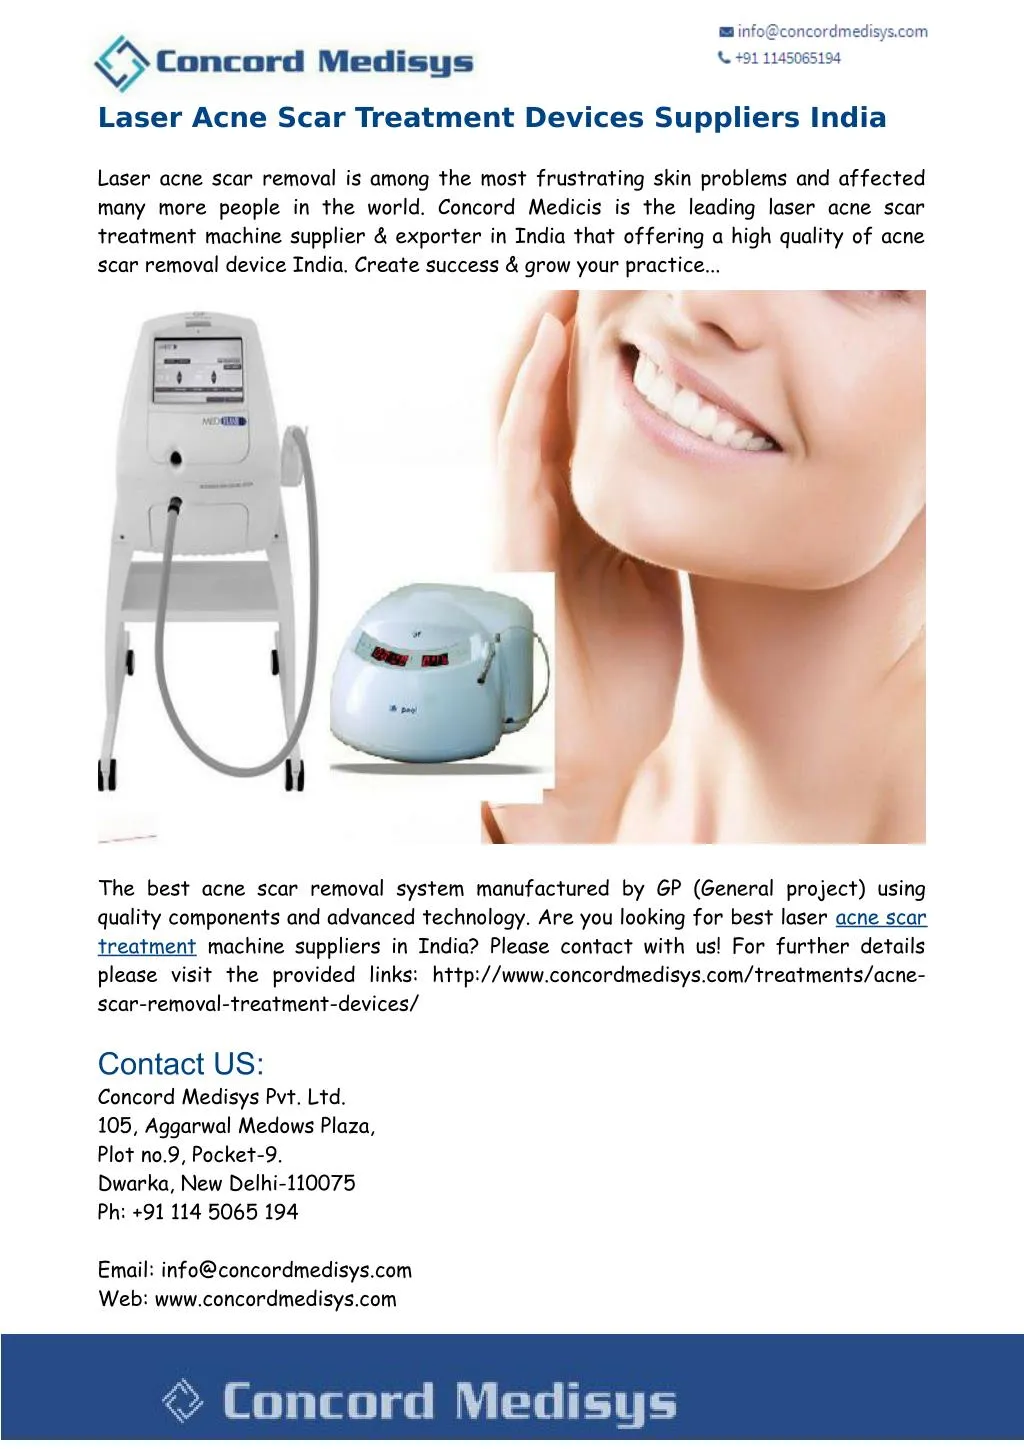 PPT - Laser Acne Scar Treatment Devices Suppliers India PowerPoint ...